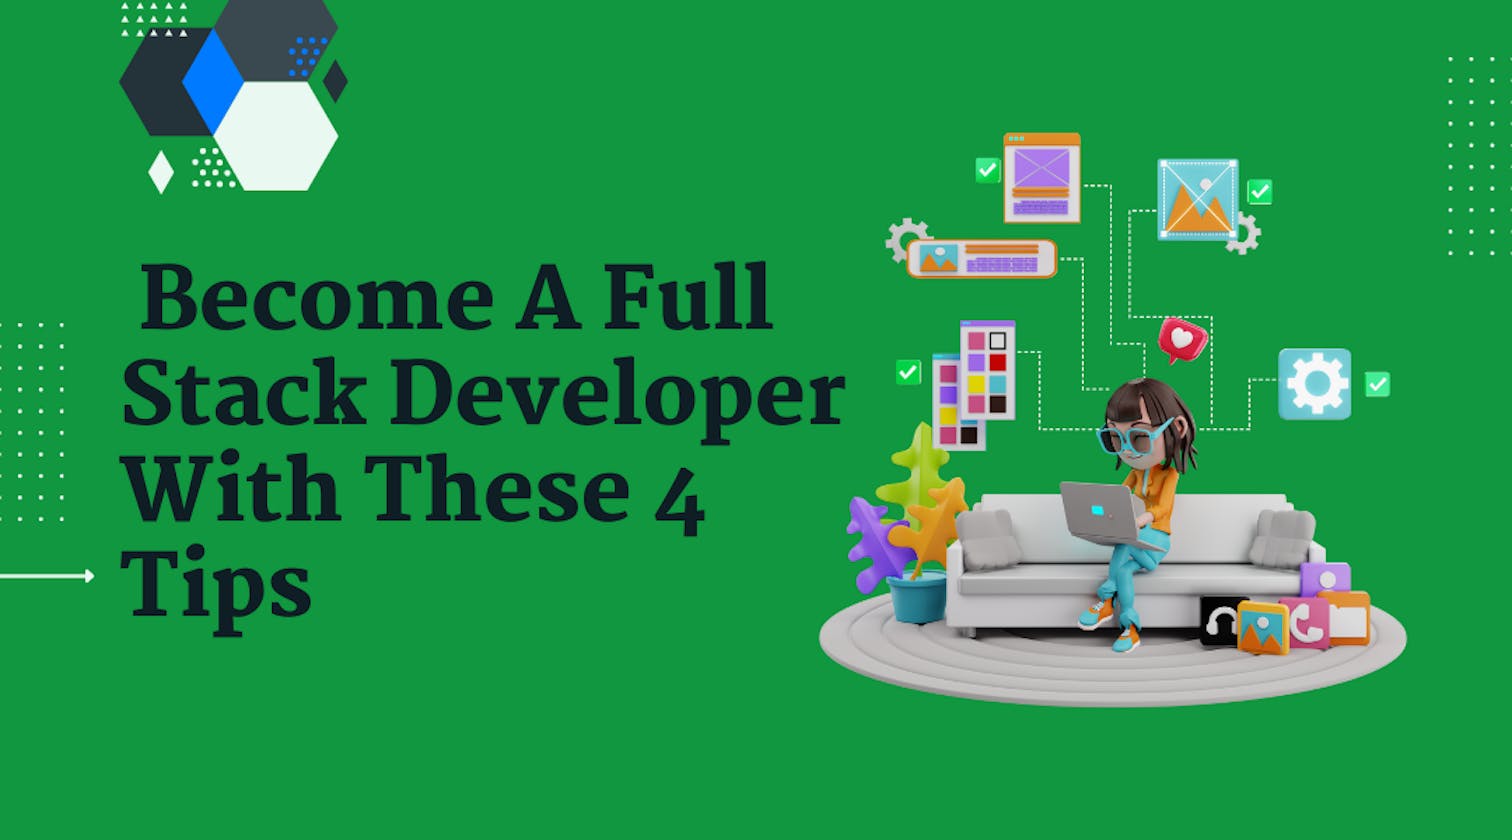 Lost In The Sea Of Full Stack Developer Courses?
Here Are 4 Tips To Help You In Becoming A Full Stack Developer!